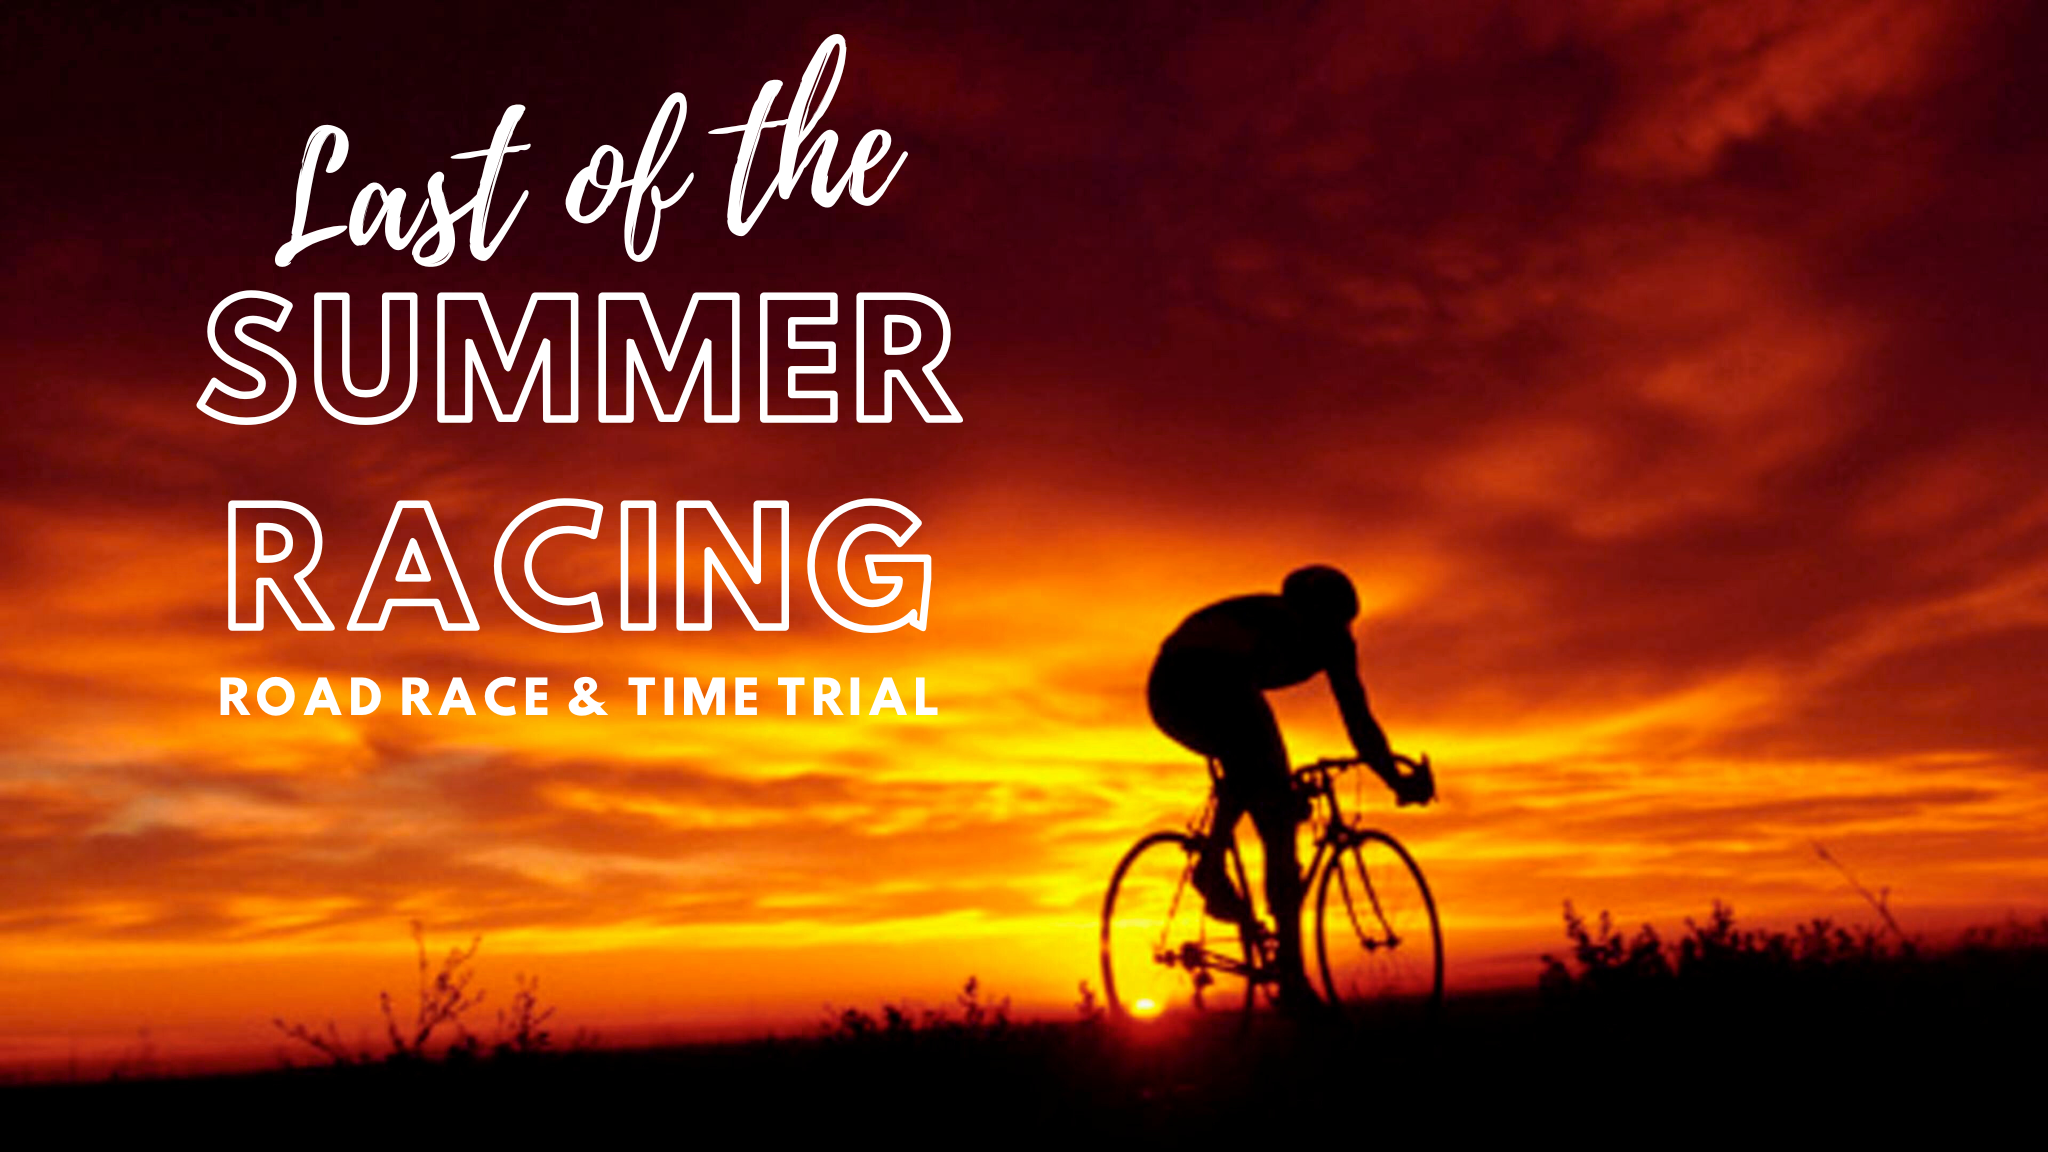 Last of the Summer Racing - Road Race & Time Trial Club Champs